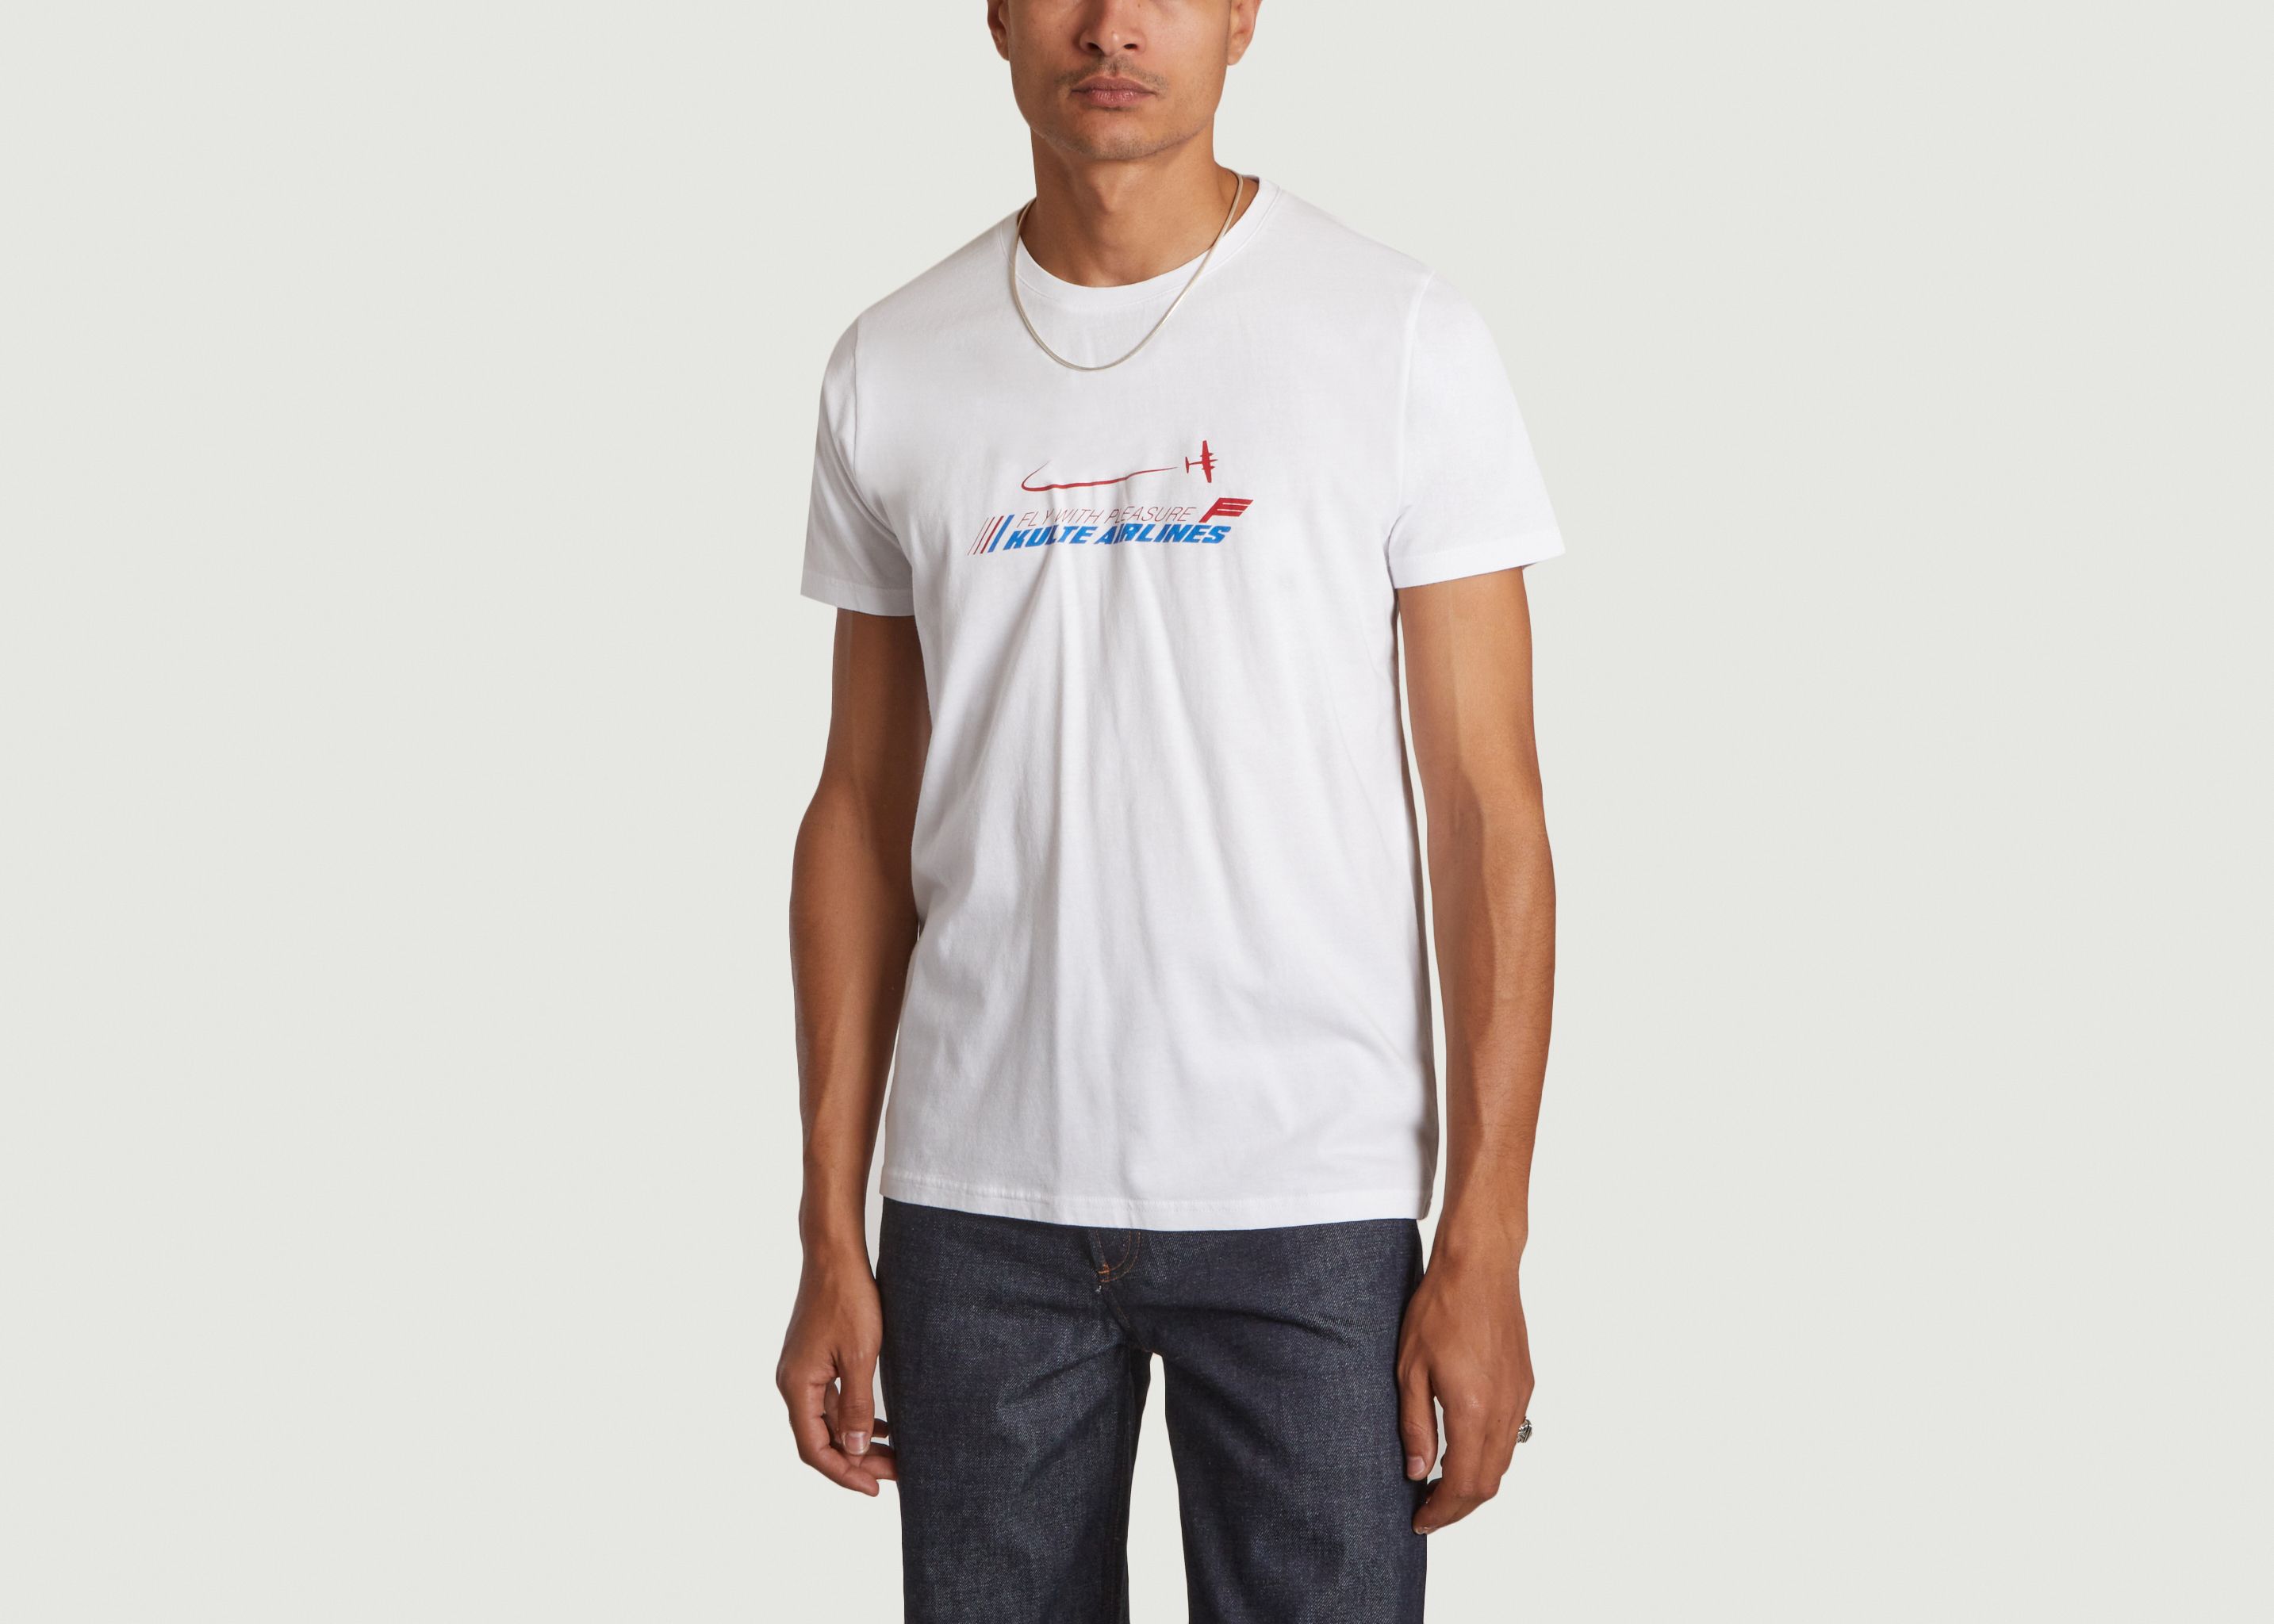 T-shirt Airlines - Kulte